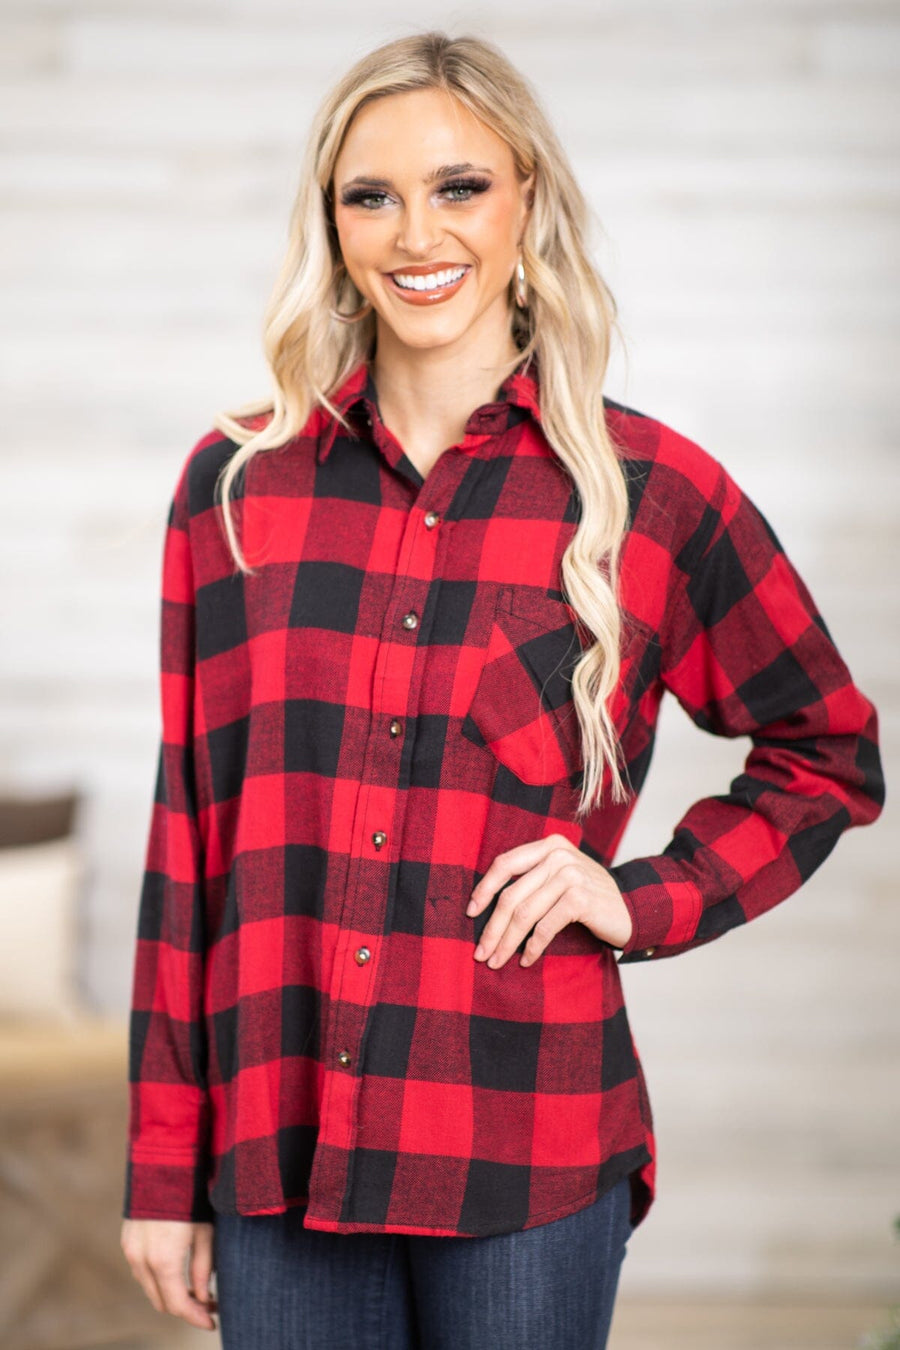 Red and Black Buffalo Plaid Button Up Top - Filly Flair